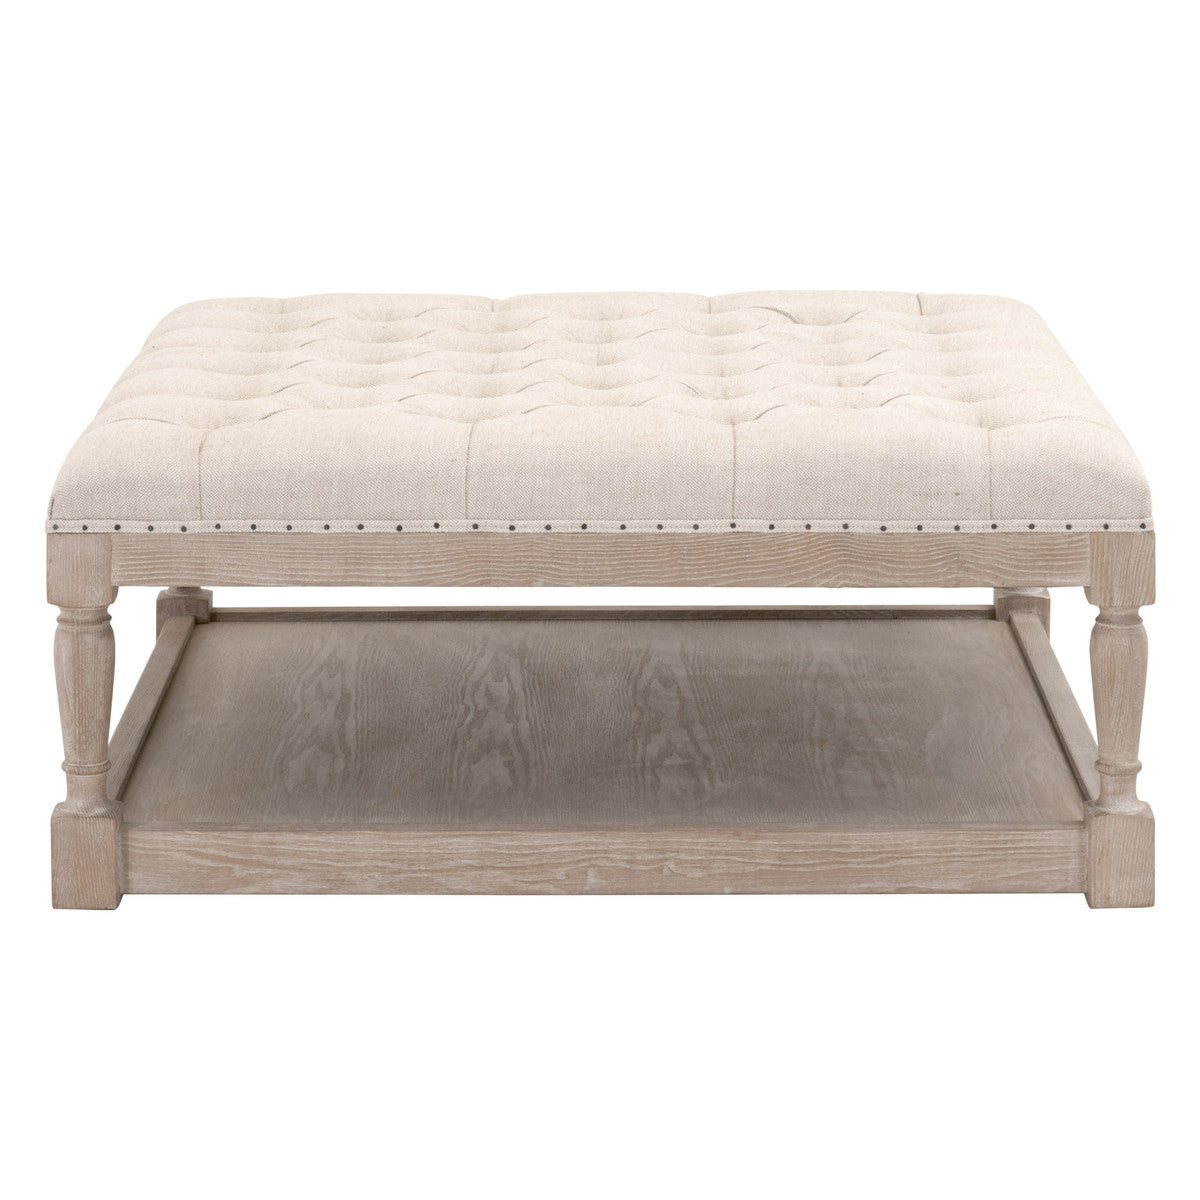 Townsend Tufted Upholstered Coffee Table - Bisque French Linen